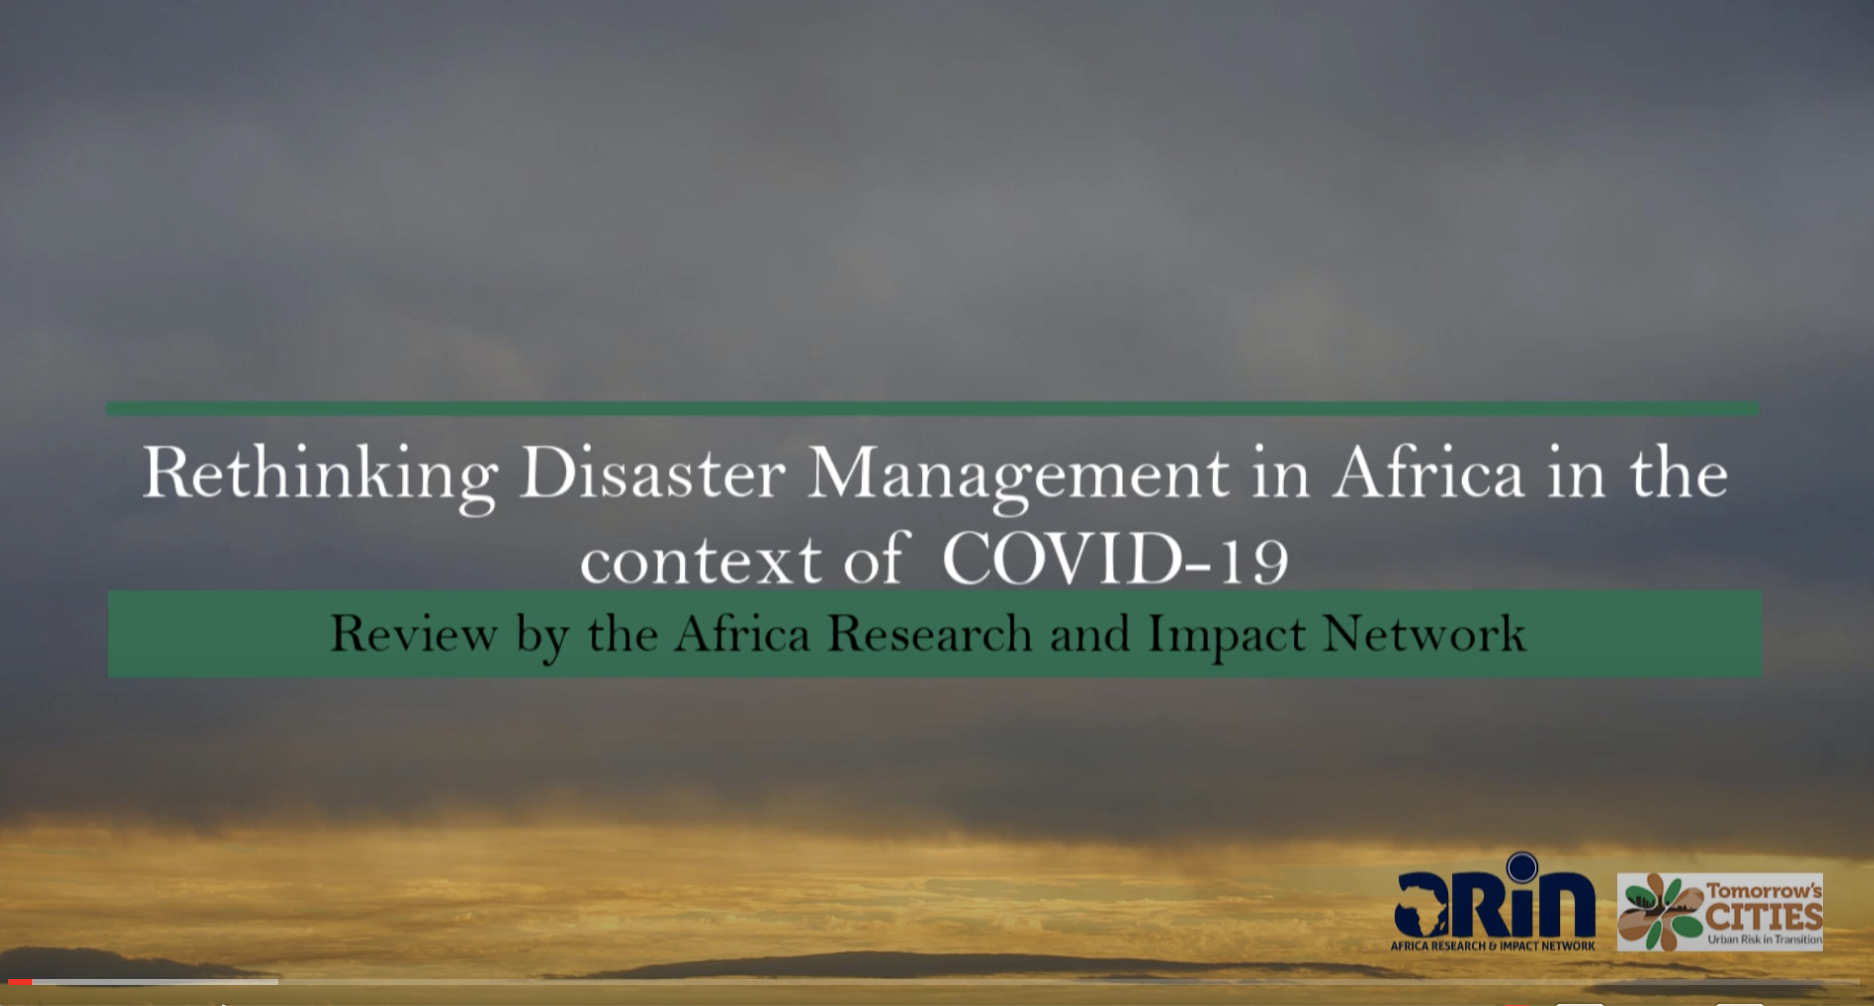 Disaster Risk Management in The Context of COVID-19 Pandemic In Africa